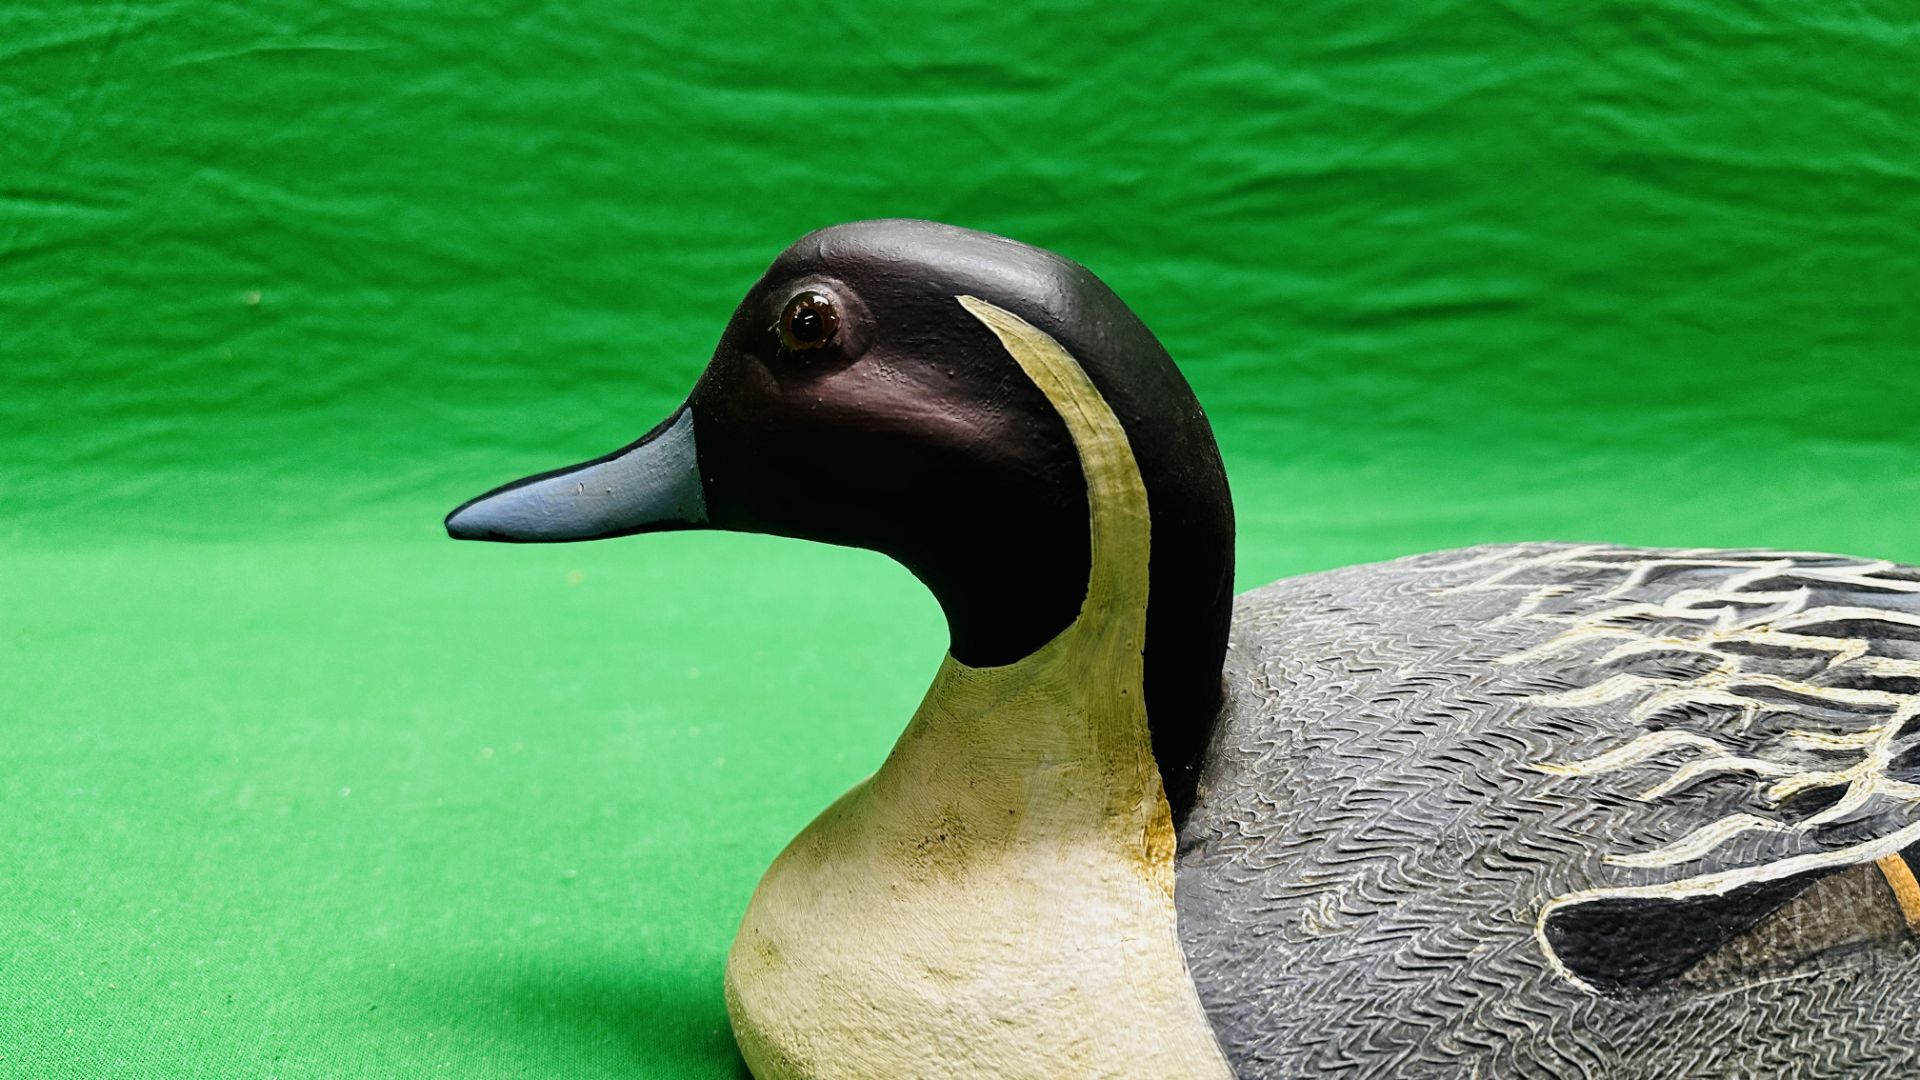 A HANDCRAFTED DUCK DECOY HAVING HANDPAINTED DETAIL AND GLASS EYES. - Image 7 of 10